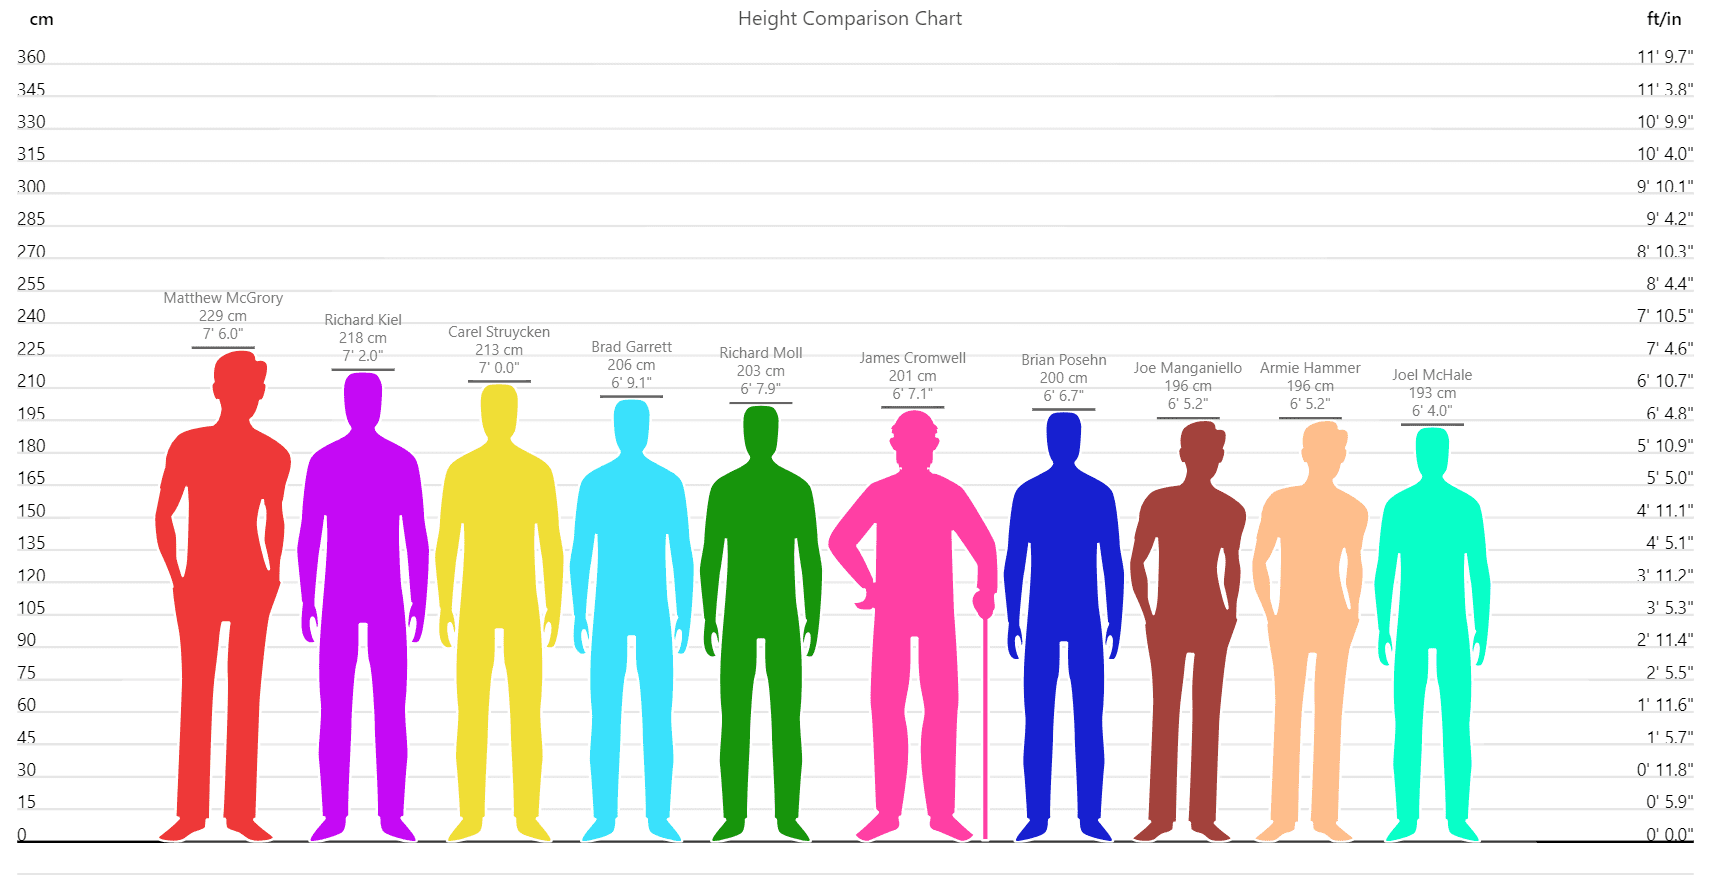 Top 10 Tallest Hollywood Actors - Height Comparison Chart